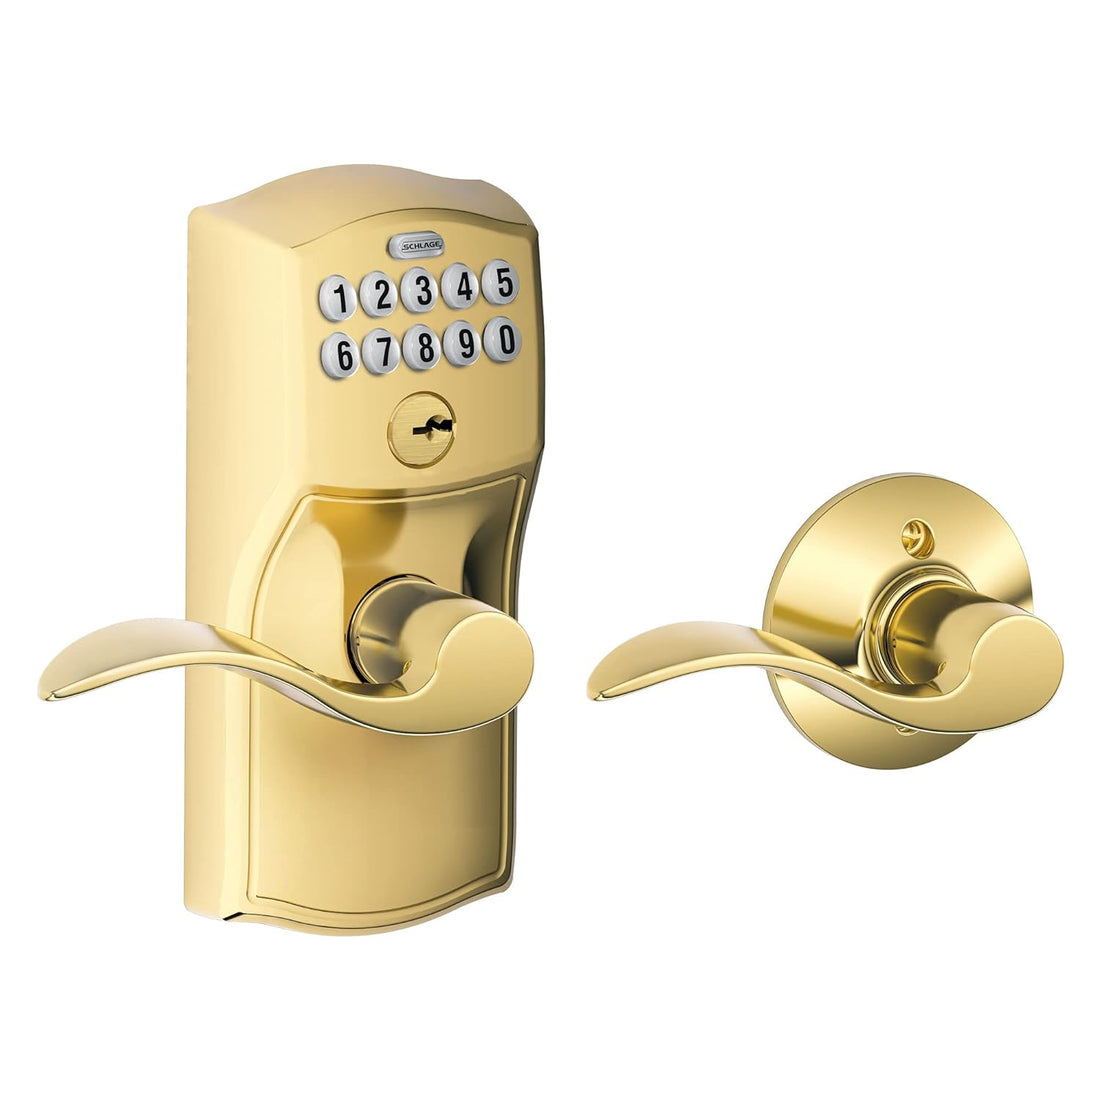 Schlage FE575 CAM 505 Acc Camelot Keypad Entry with Auto-Lock and Accent Levers, Bright Brass